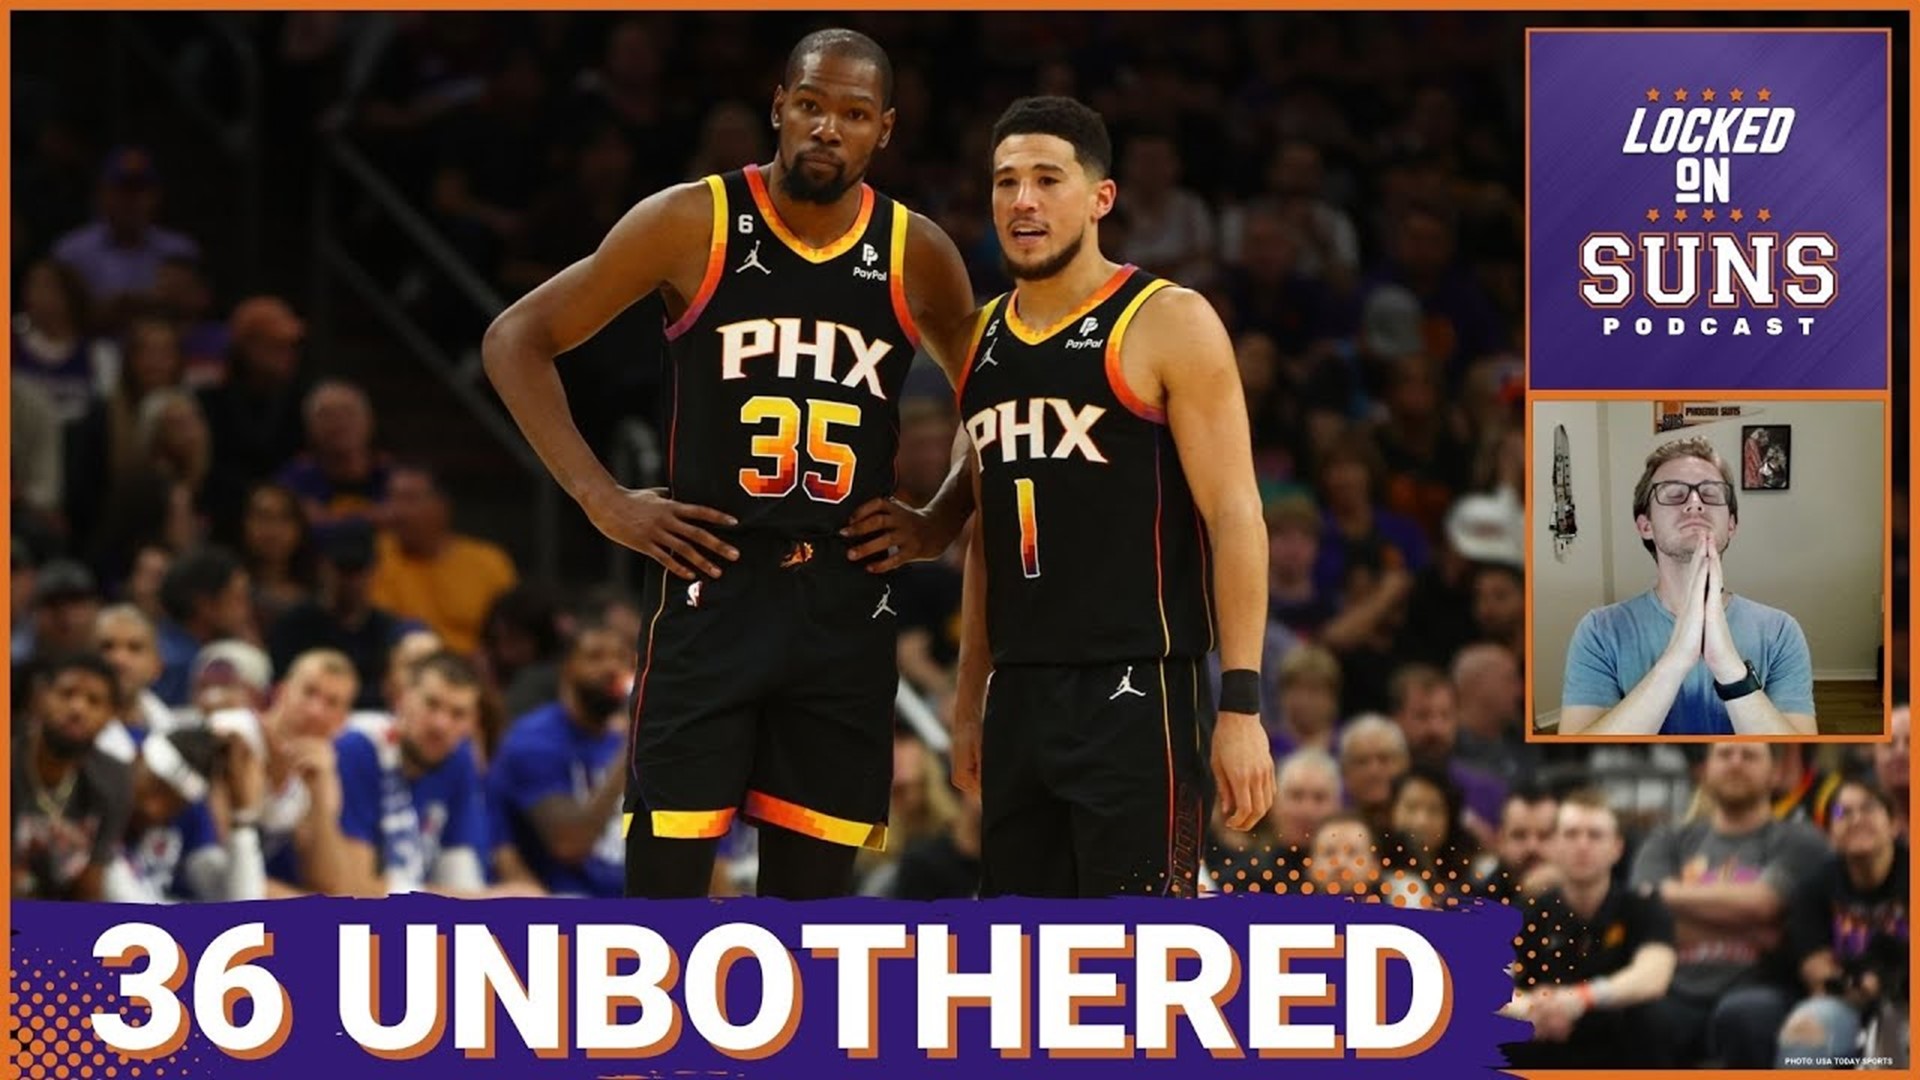 Despite a loss in the NBA playoffs, Devin Booker and Kevin Durant are great enough to bring a championship to the Phoenix Suns as evidenced by a tweet from Booker